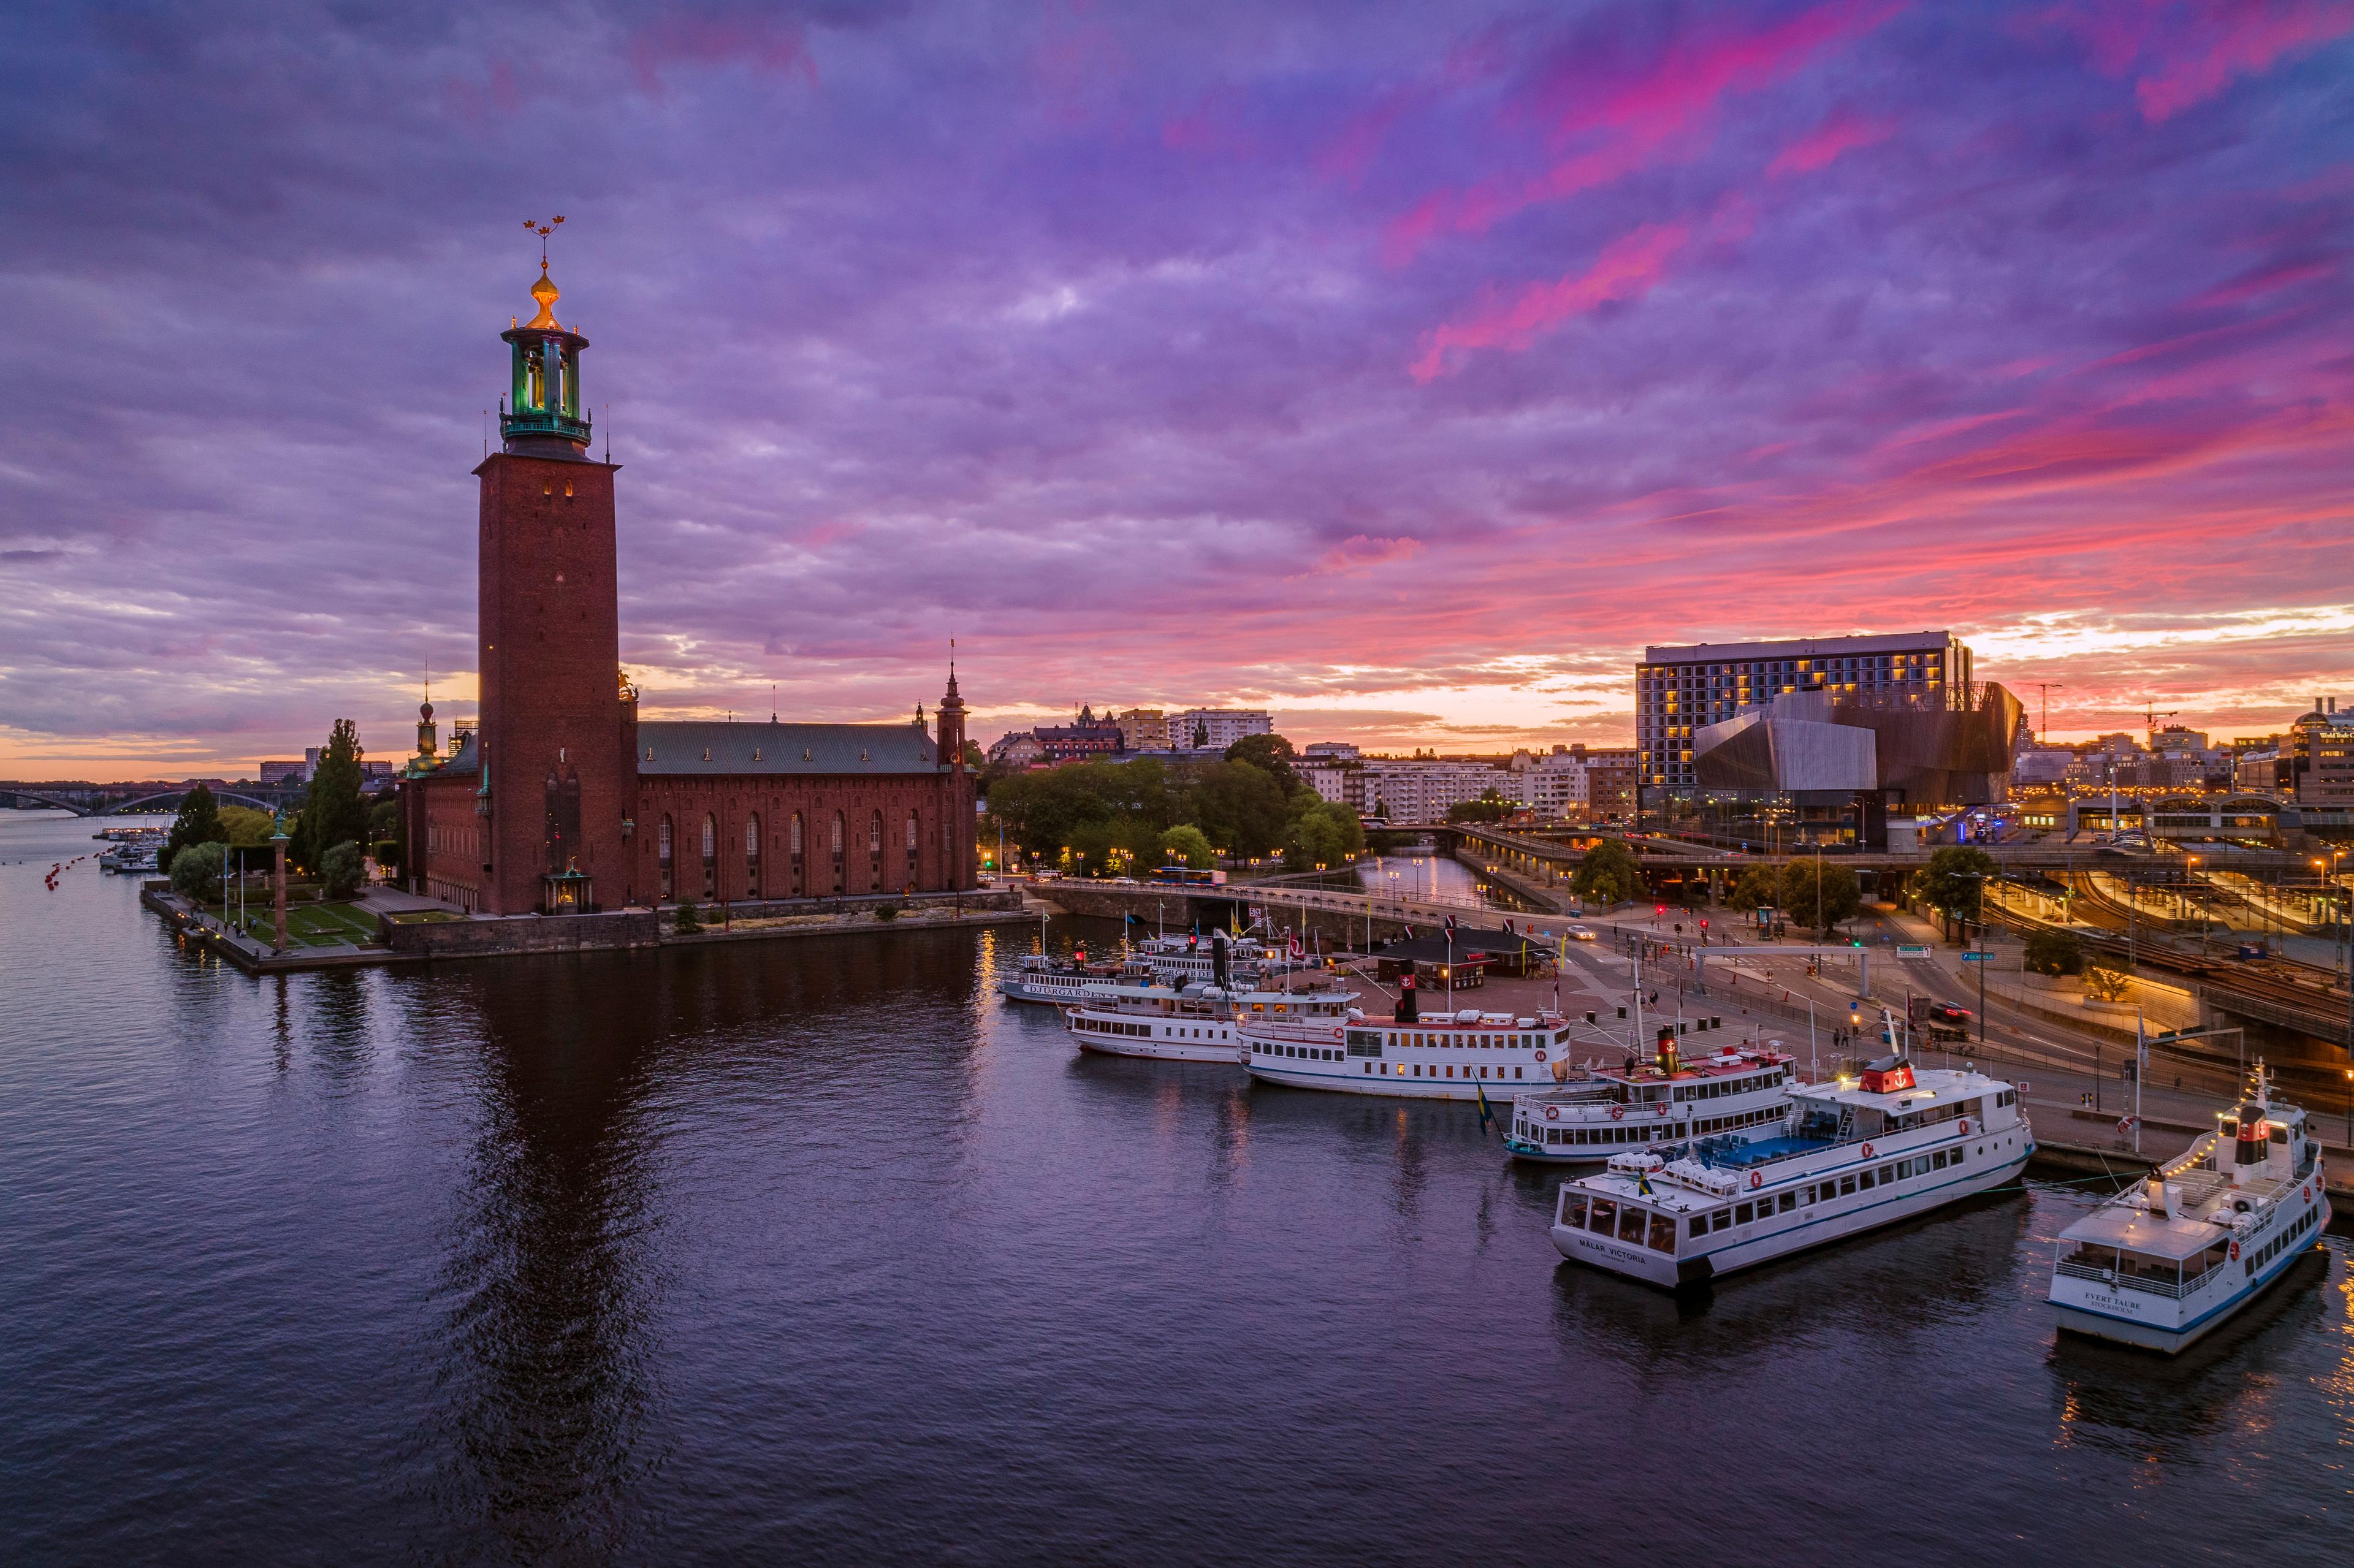 A view of the city hall in Stockholm